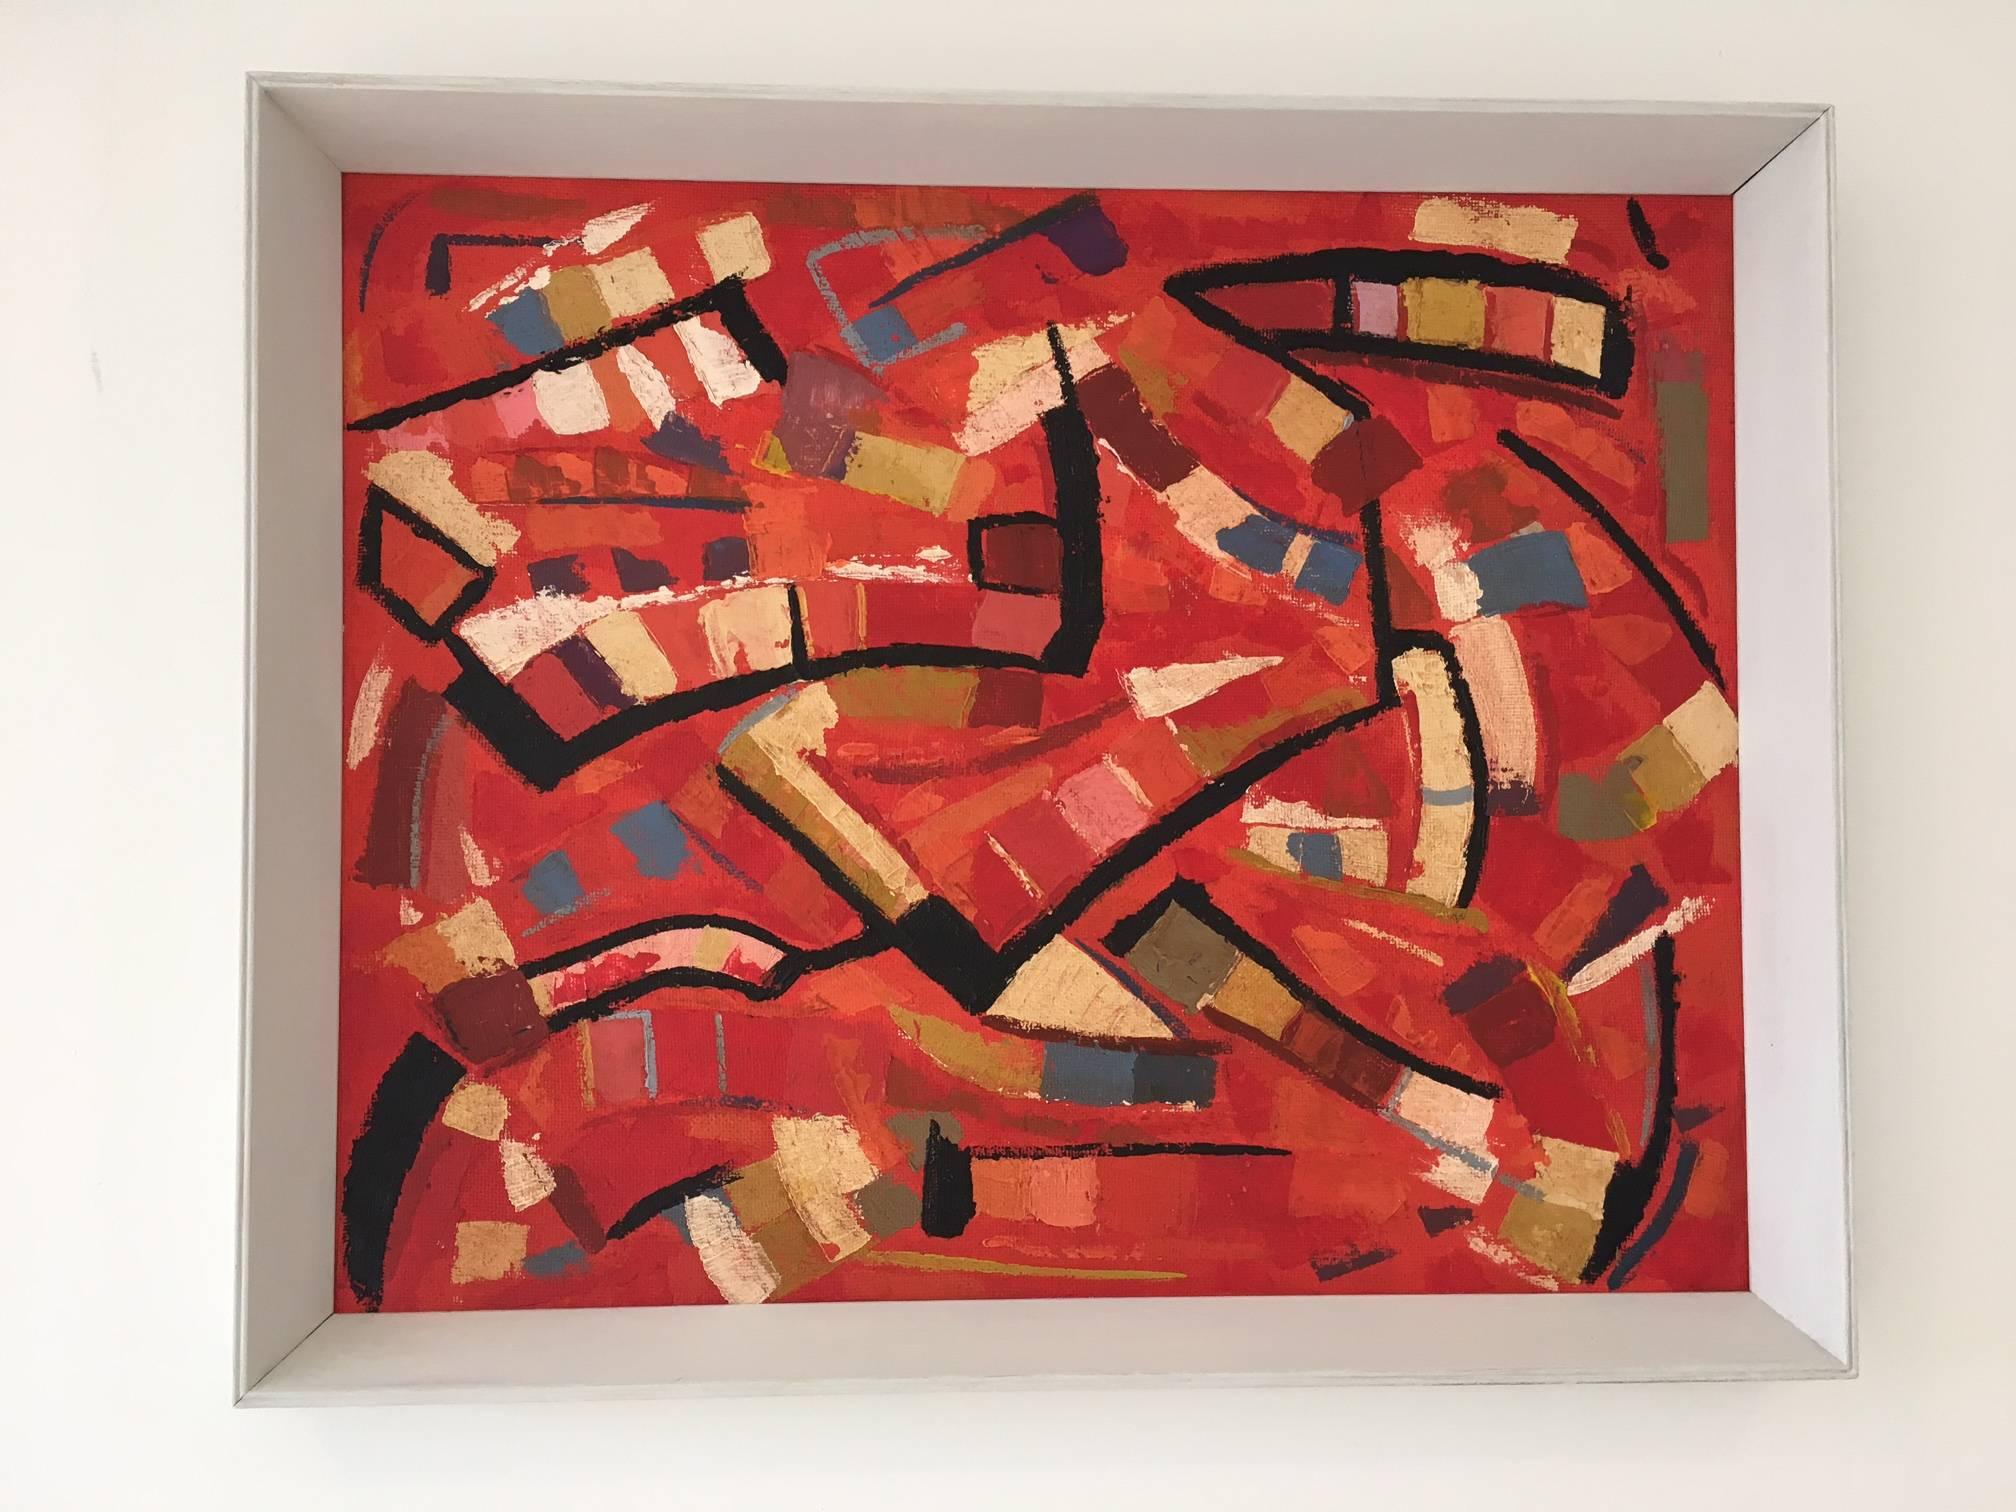 A bold and vibrant late century English abstract oil painting on board. The painting is unsigned and is in its original white painted wood frame. It is a striking piece with thick and interesting geometric brushstrokes and a strong color palette of